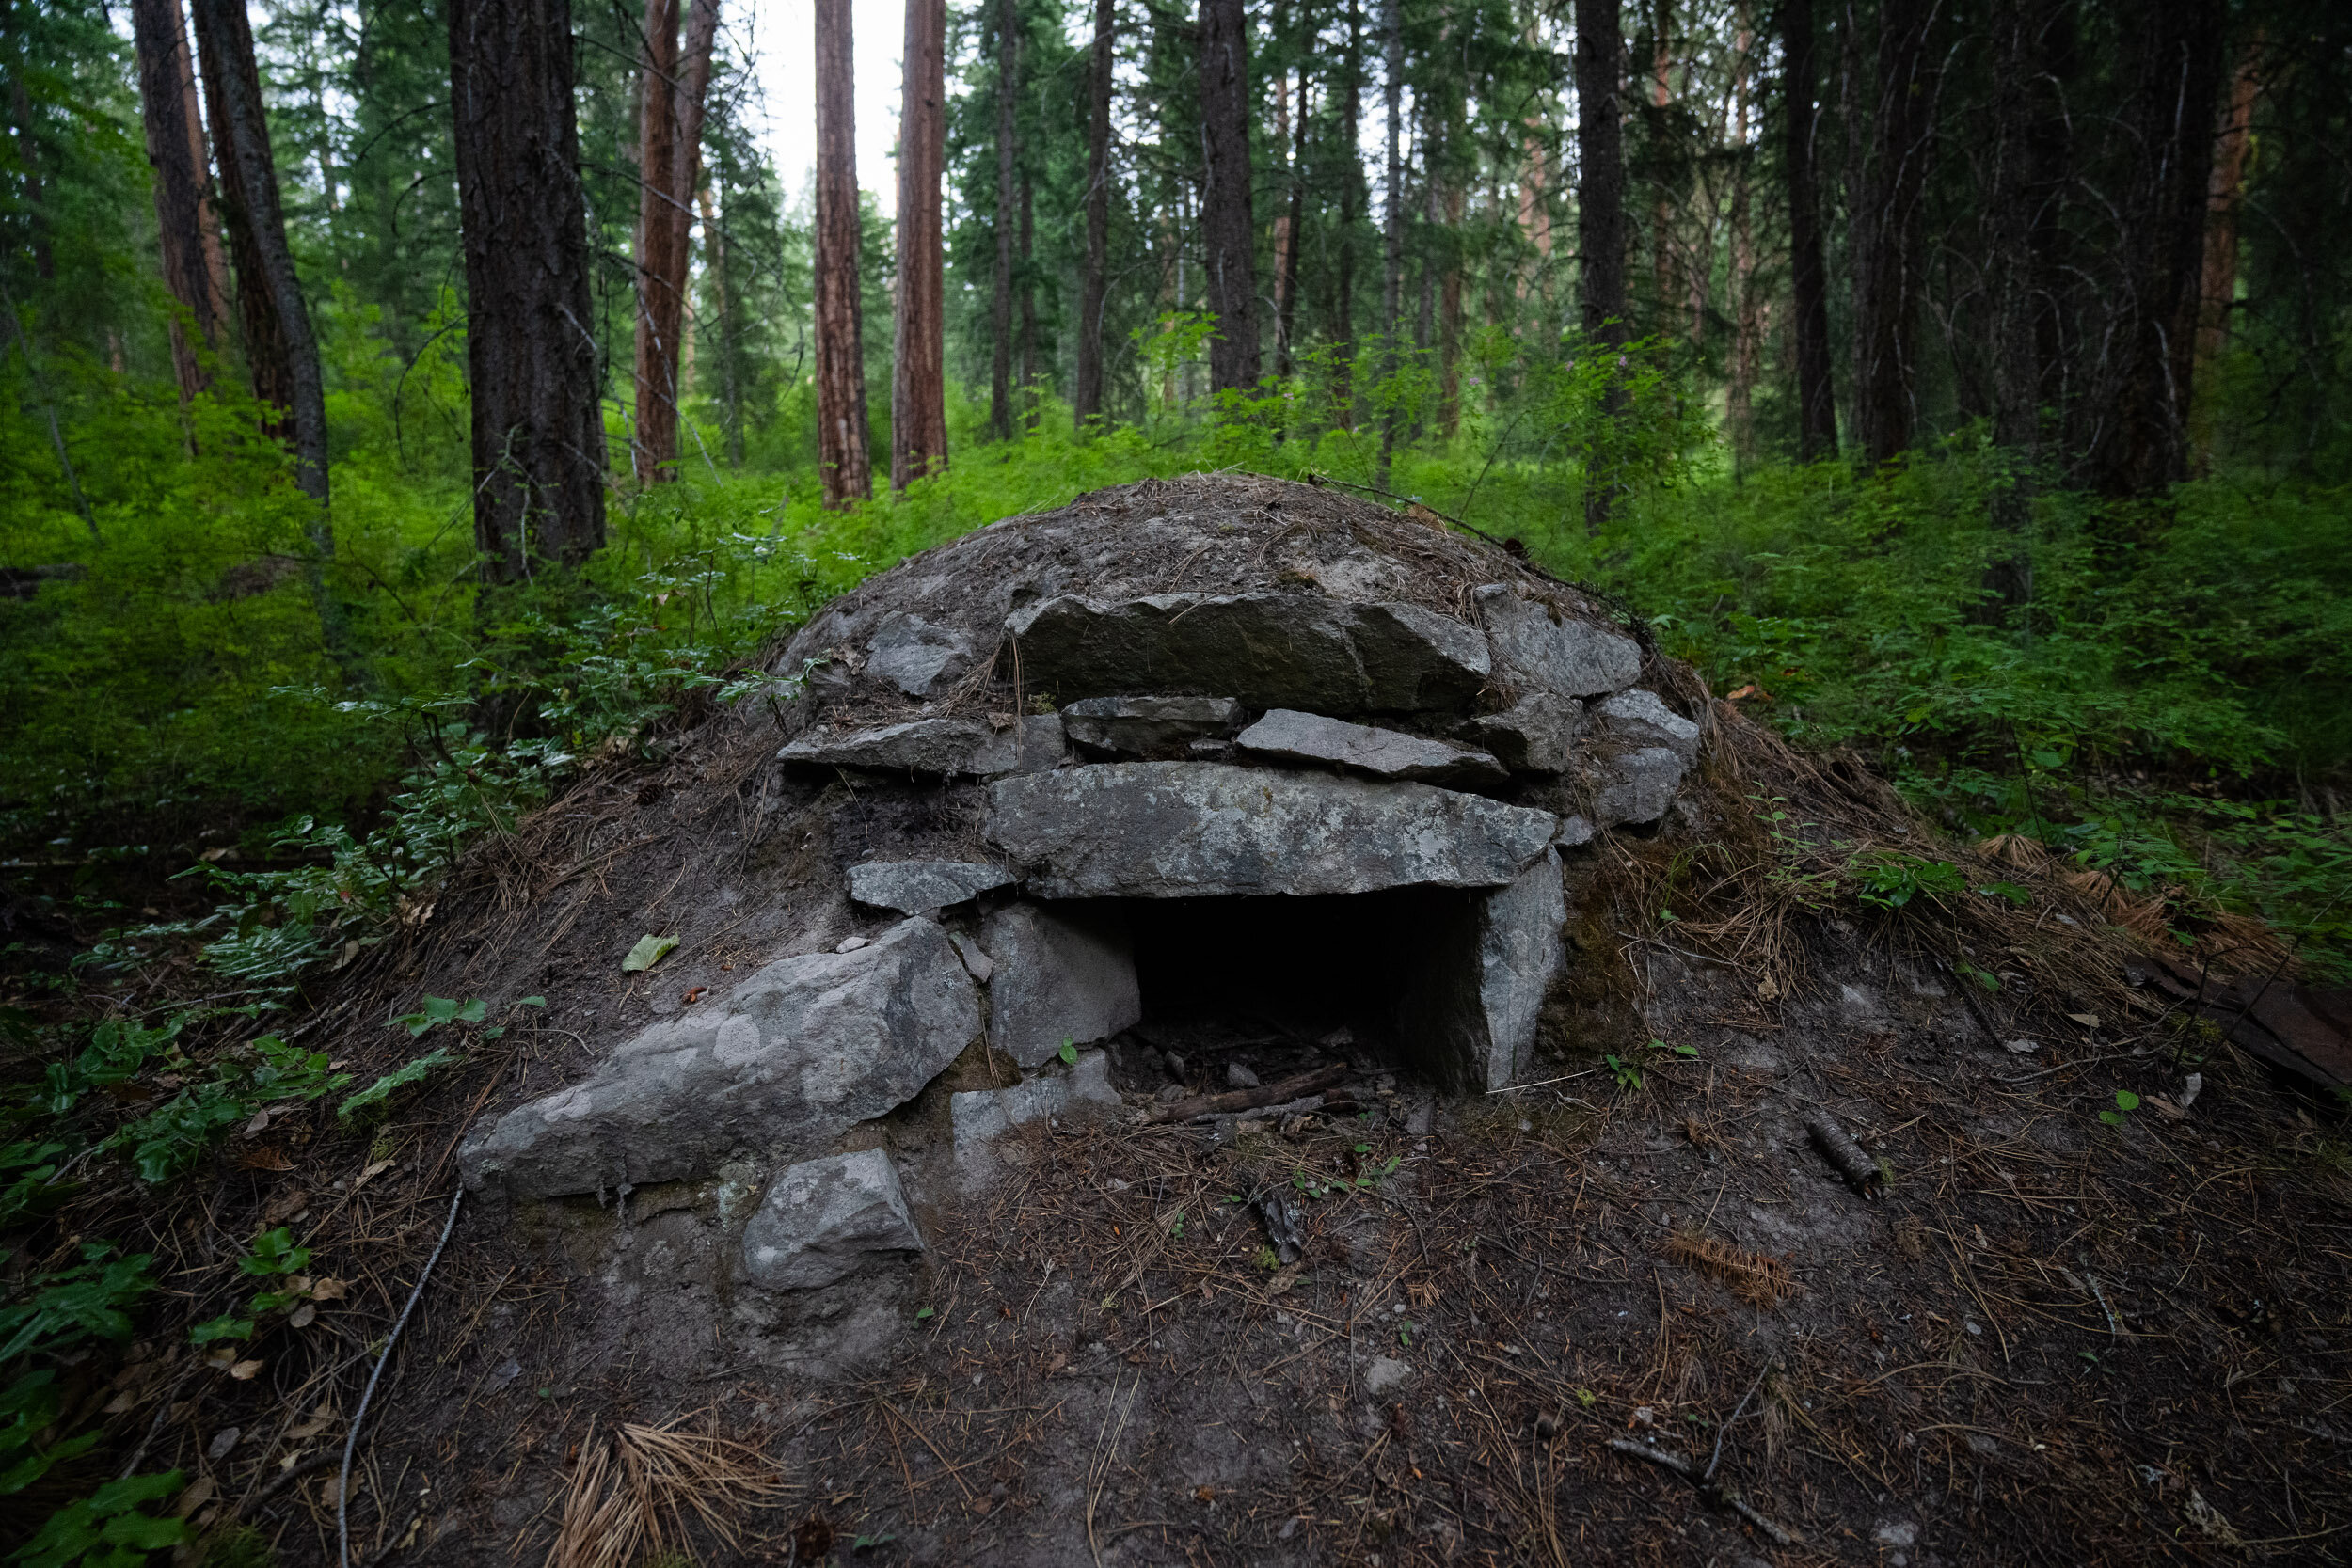  Rock Ovens like this can be found along the route of the Kettle Valley Railway. Building the KVR was hard, dangerous work. With an oven like this at camp, workers could have freshly baked bread each day. 